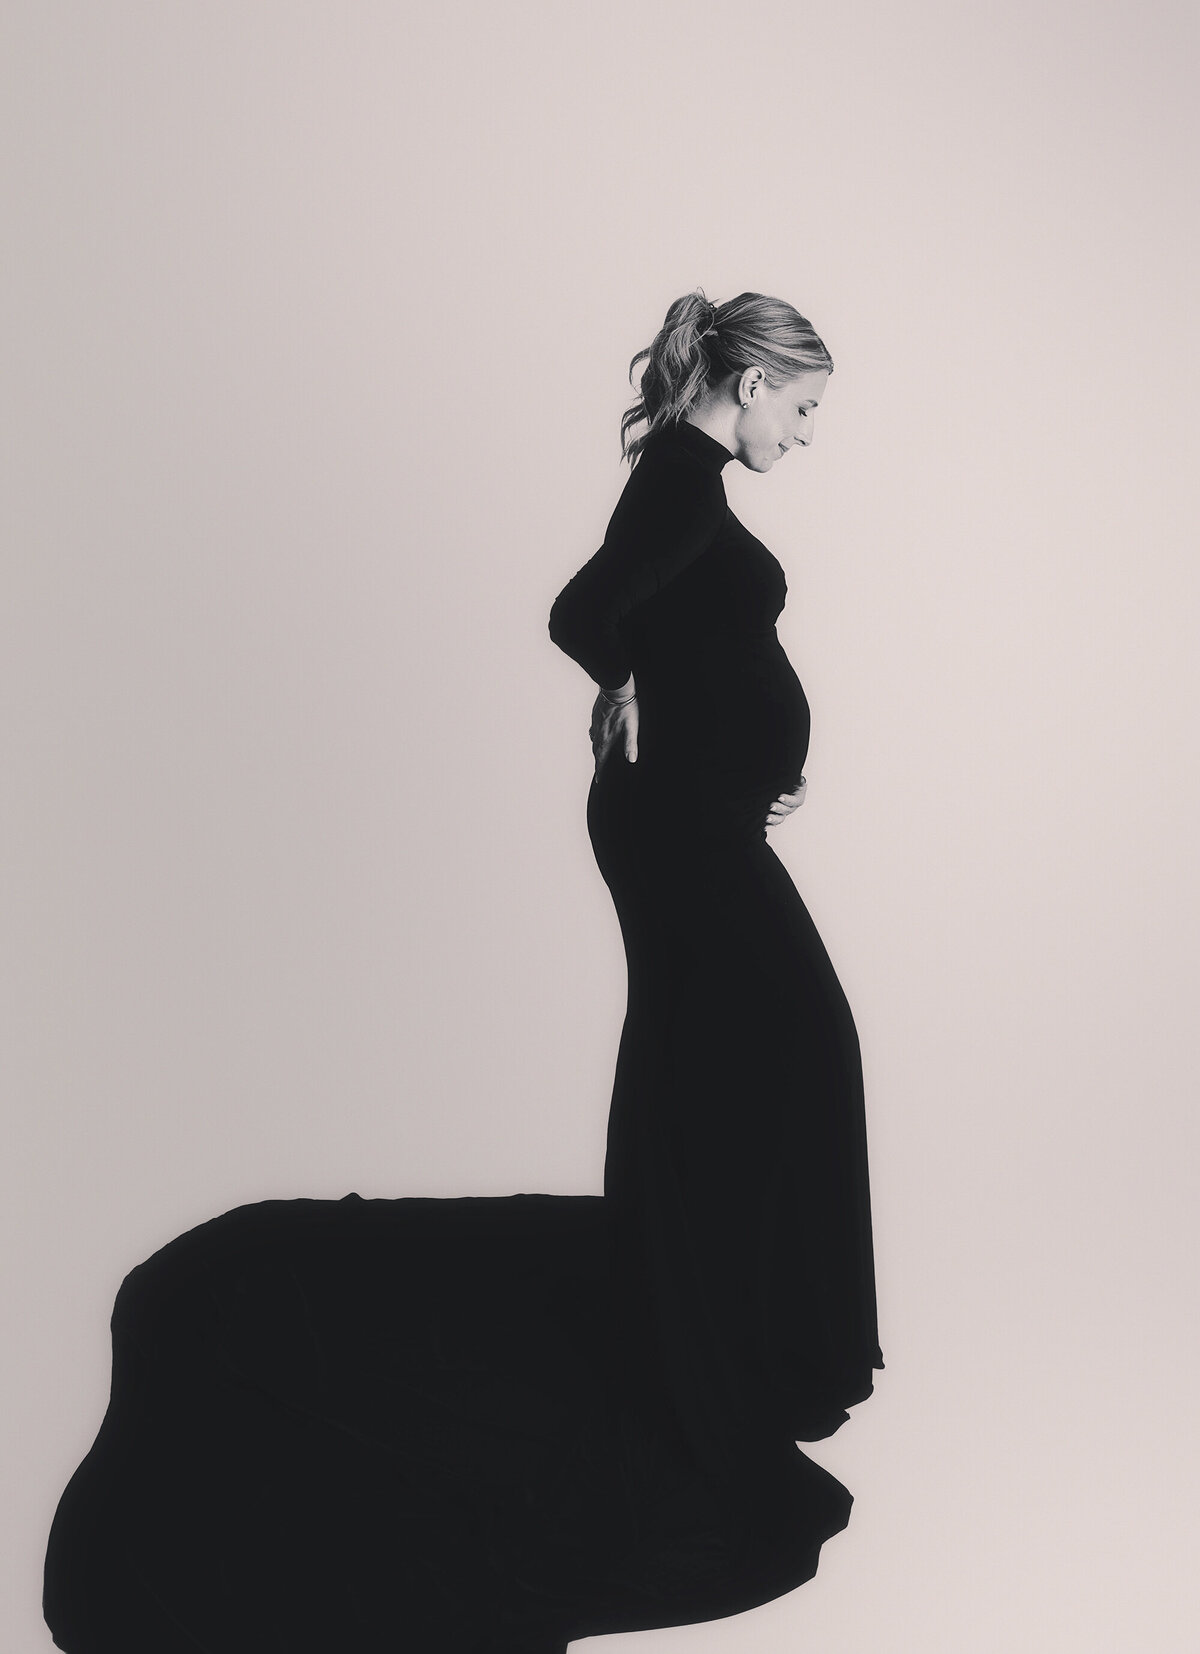 Pregnant woman poses for Studio Maternity Portraits in Asheville, NC.